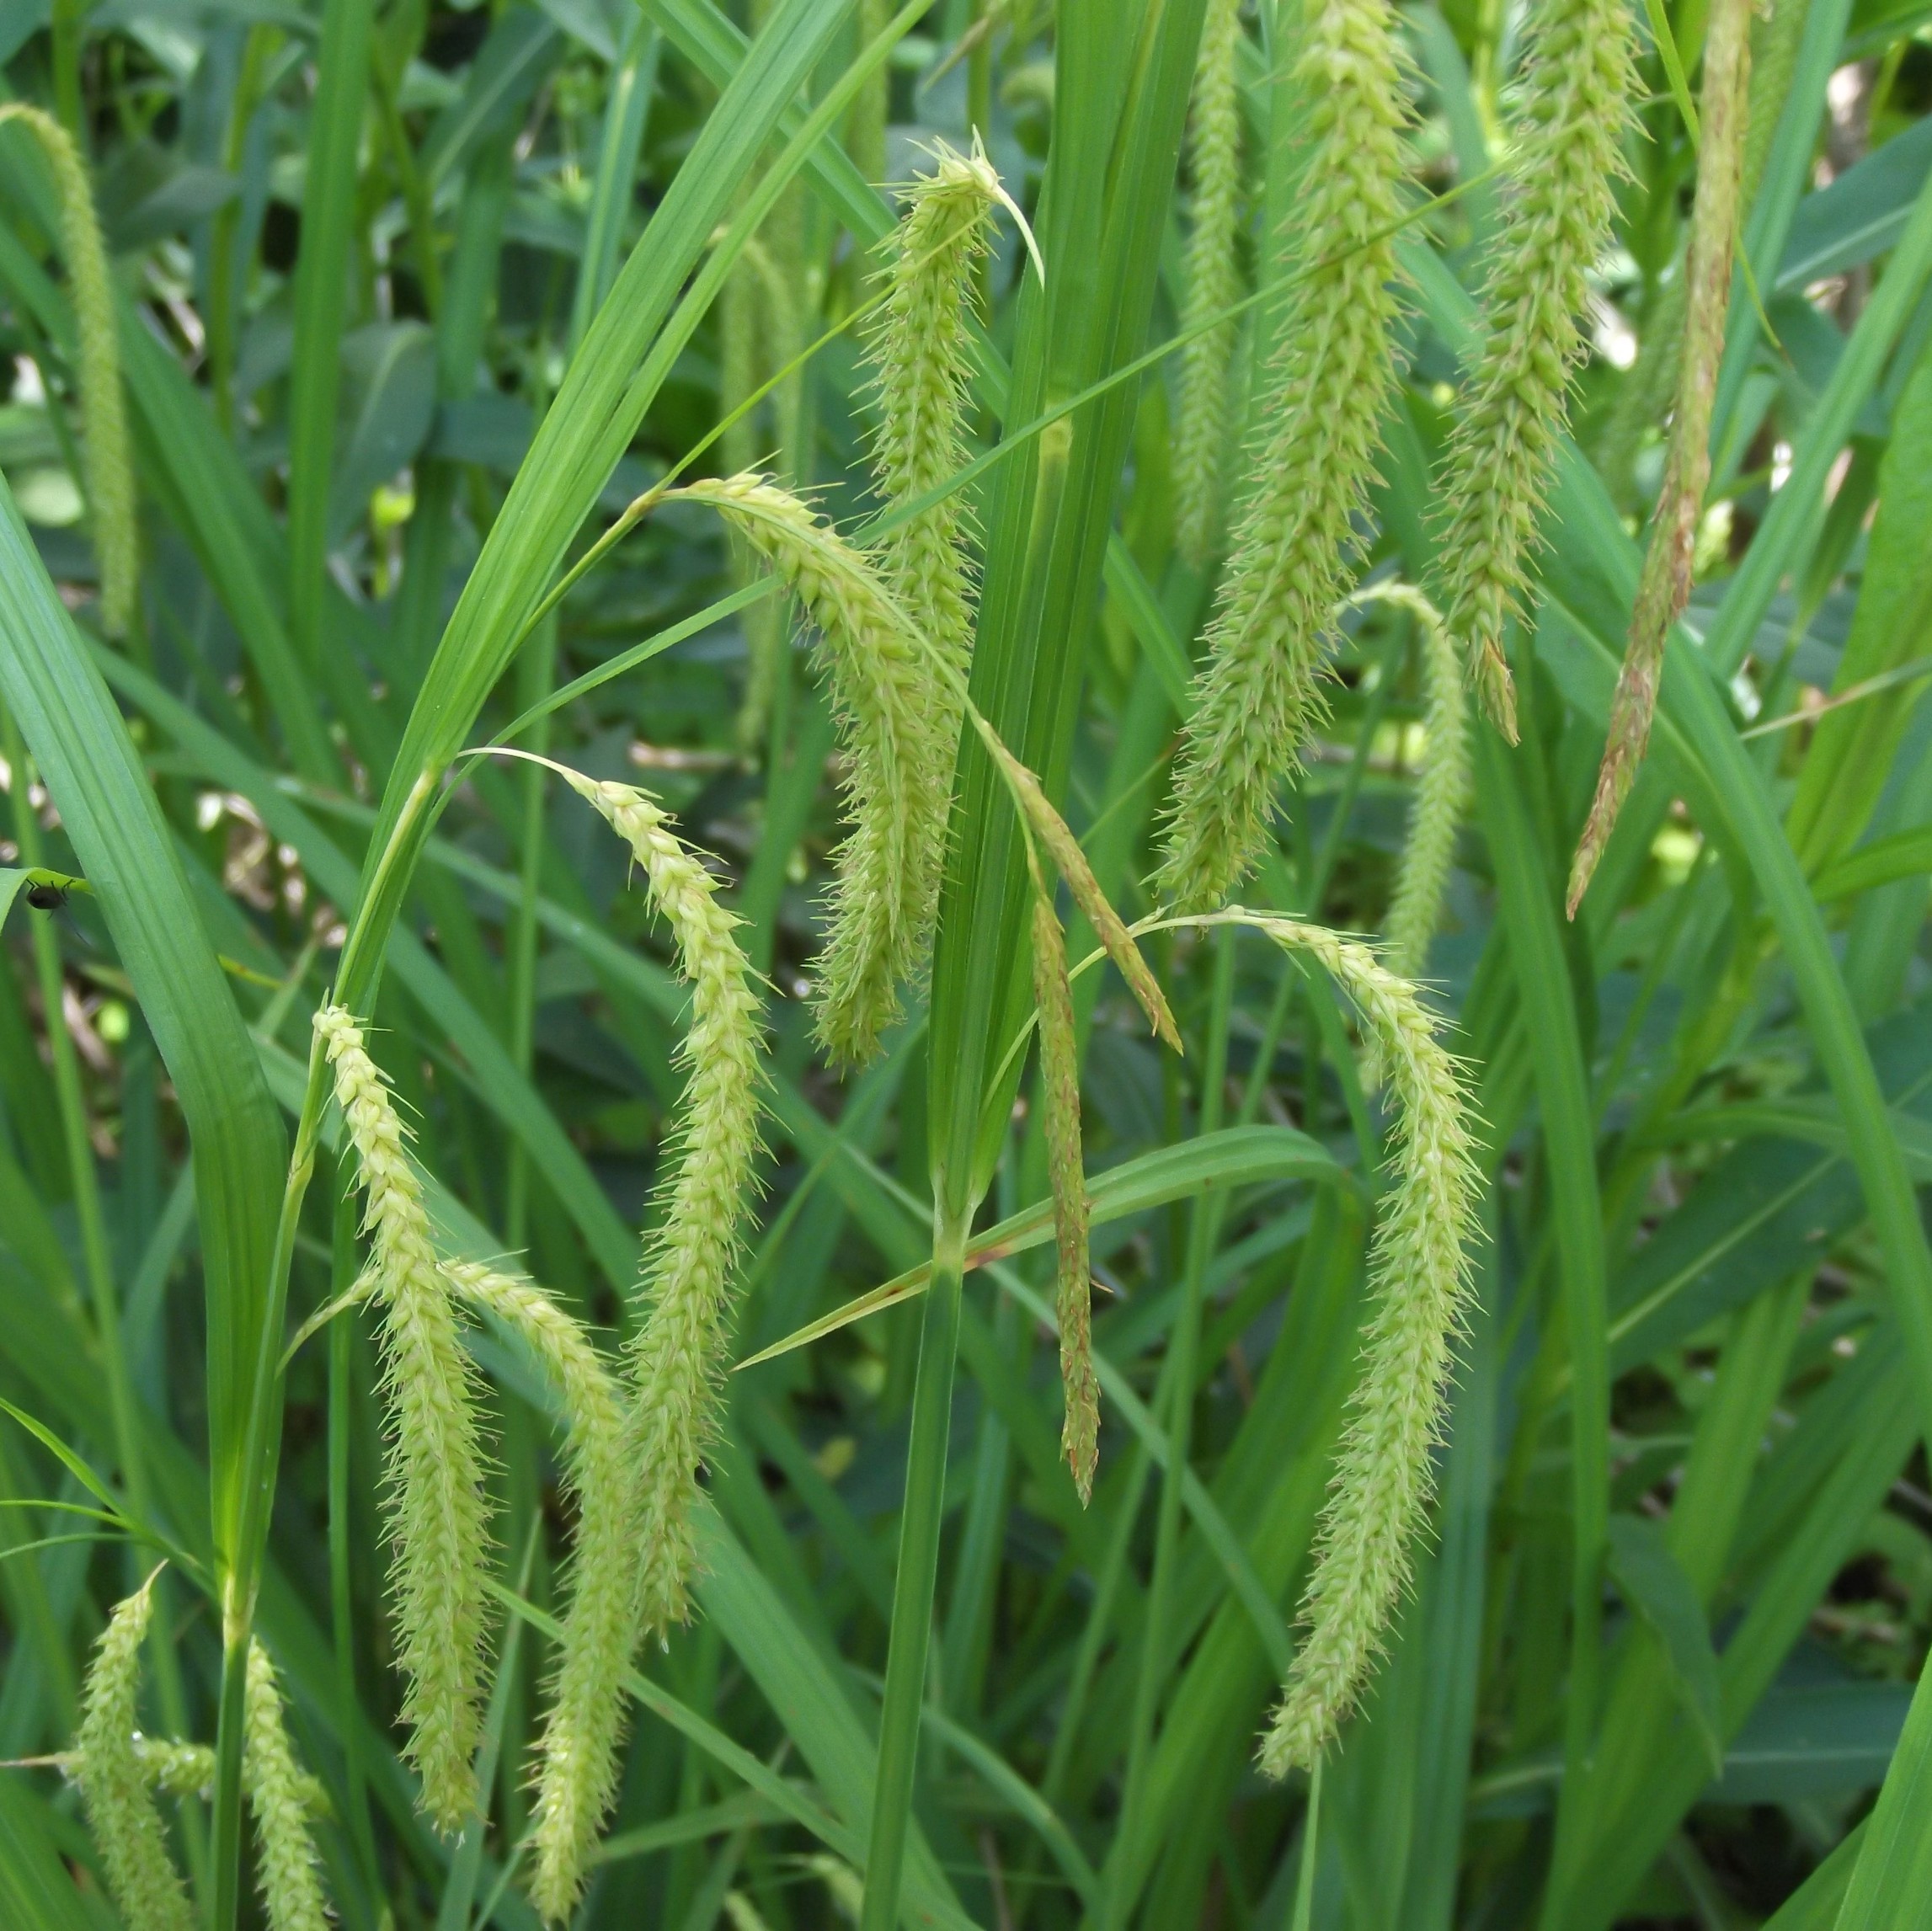 The Scientific Name is Carex crinita. You will likely hear them called Fringed Sedge. This picture shows the Male and female spikelets. of Carex crinita